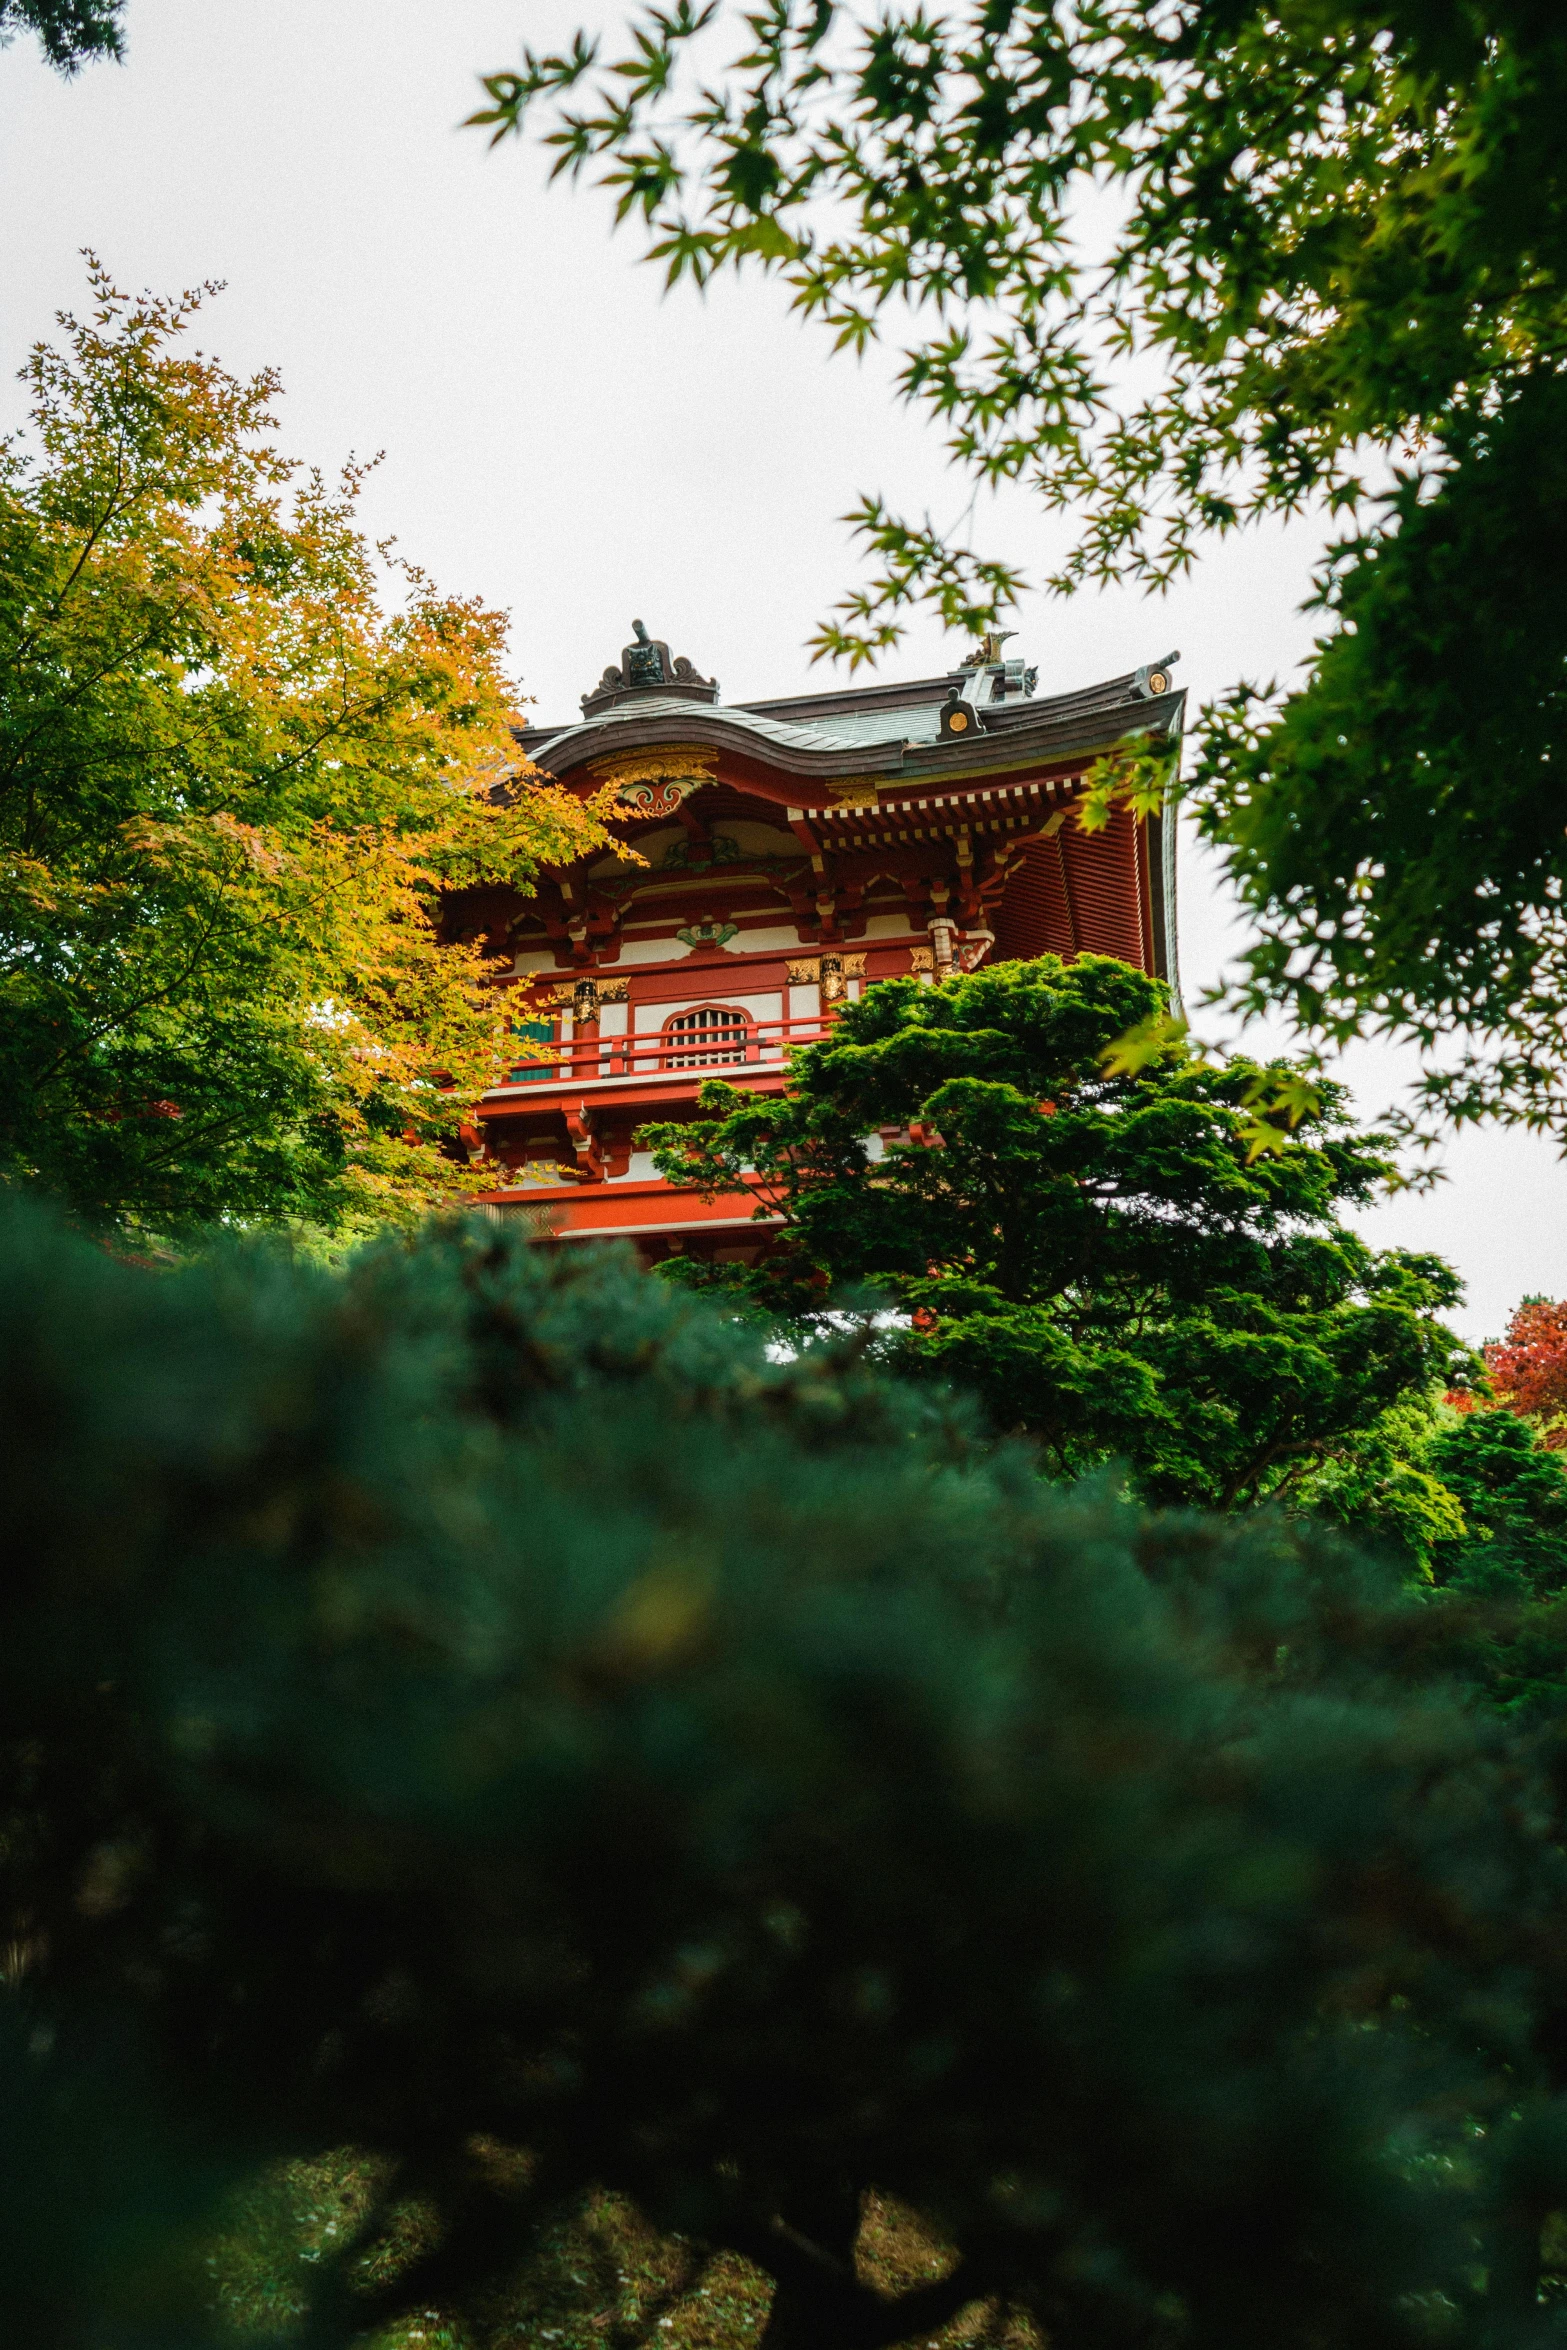 trees and an oriental structure surrounded by foliage